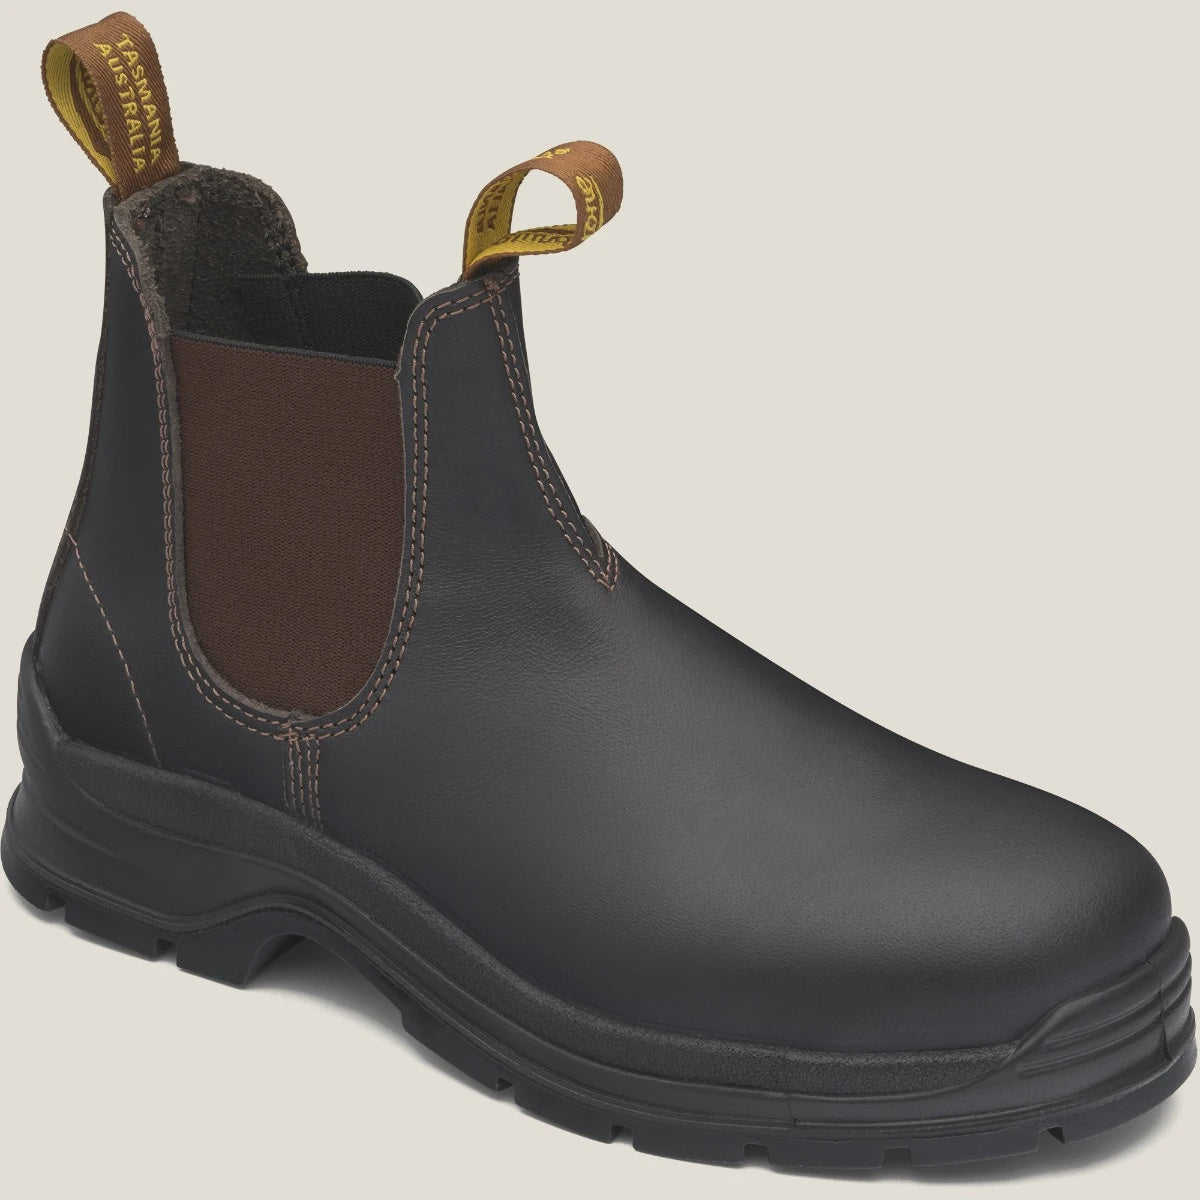 Blundstone - 311 Unisex Elastic Sided Safety Boot - Brown